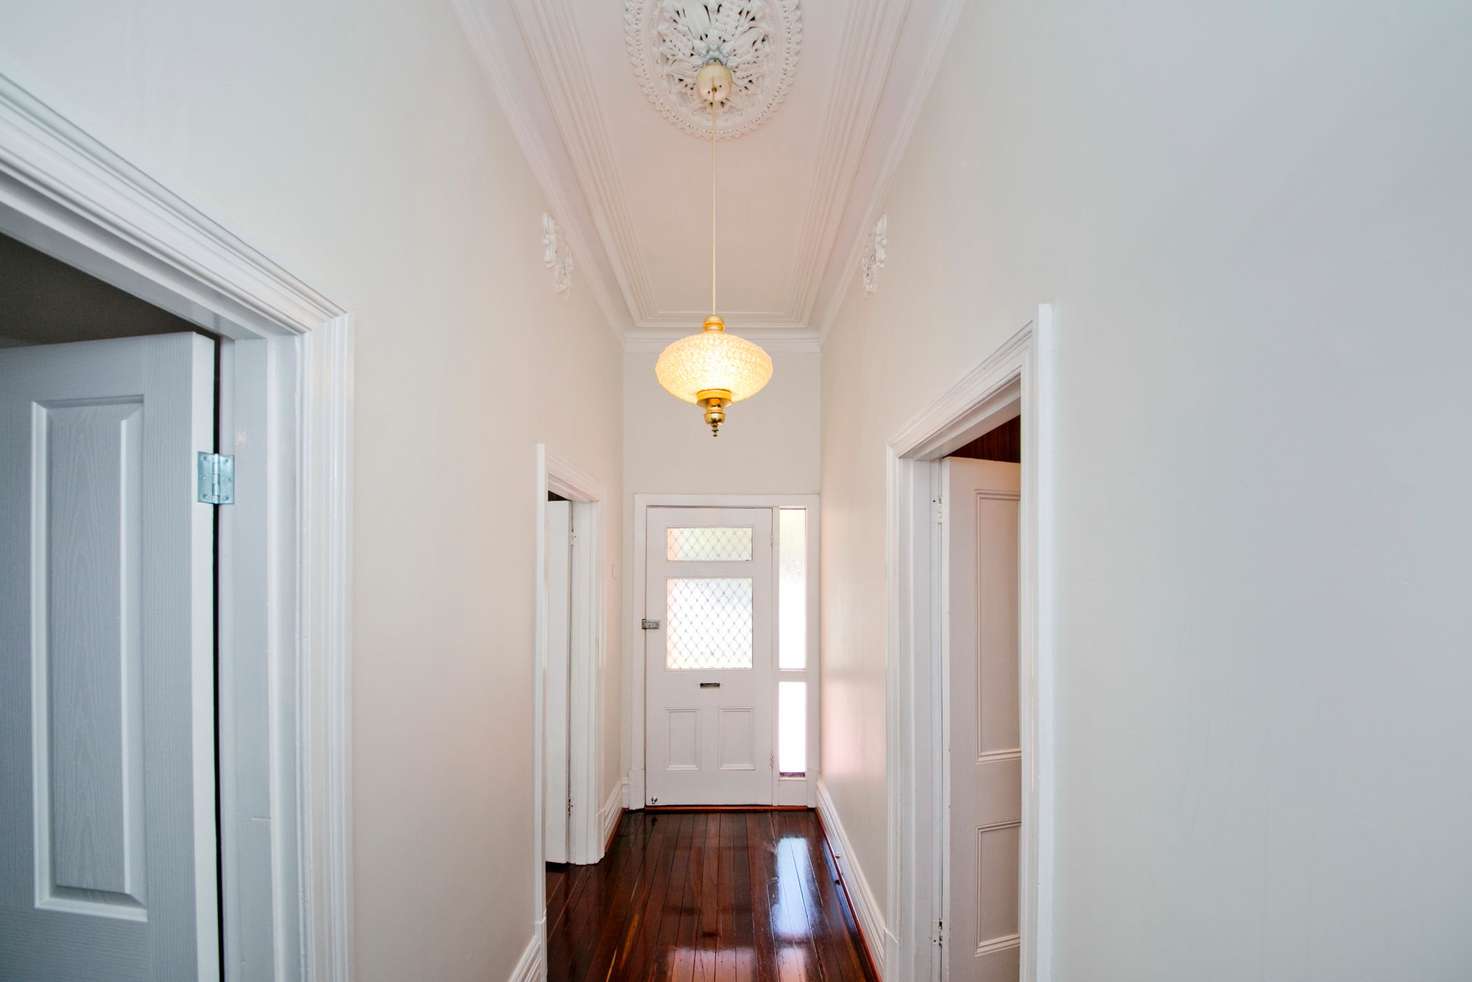 Main view of Homely house listing, 83 St Leonards Avenue, West Leederville WA 6007